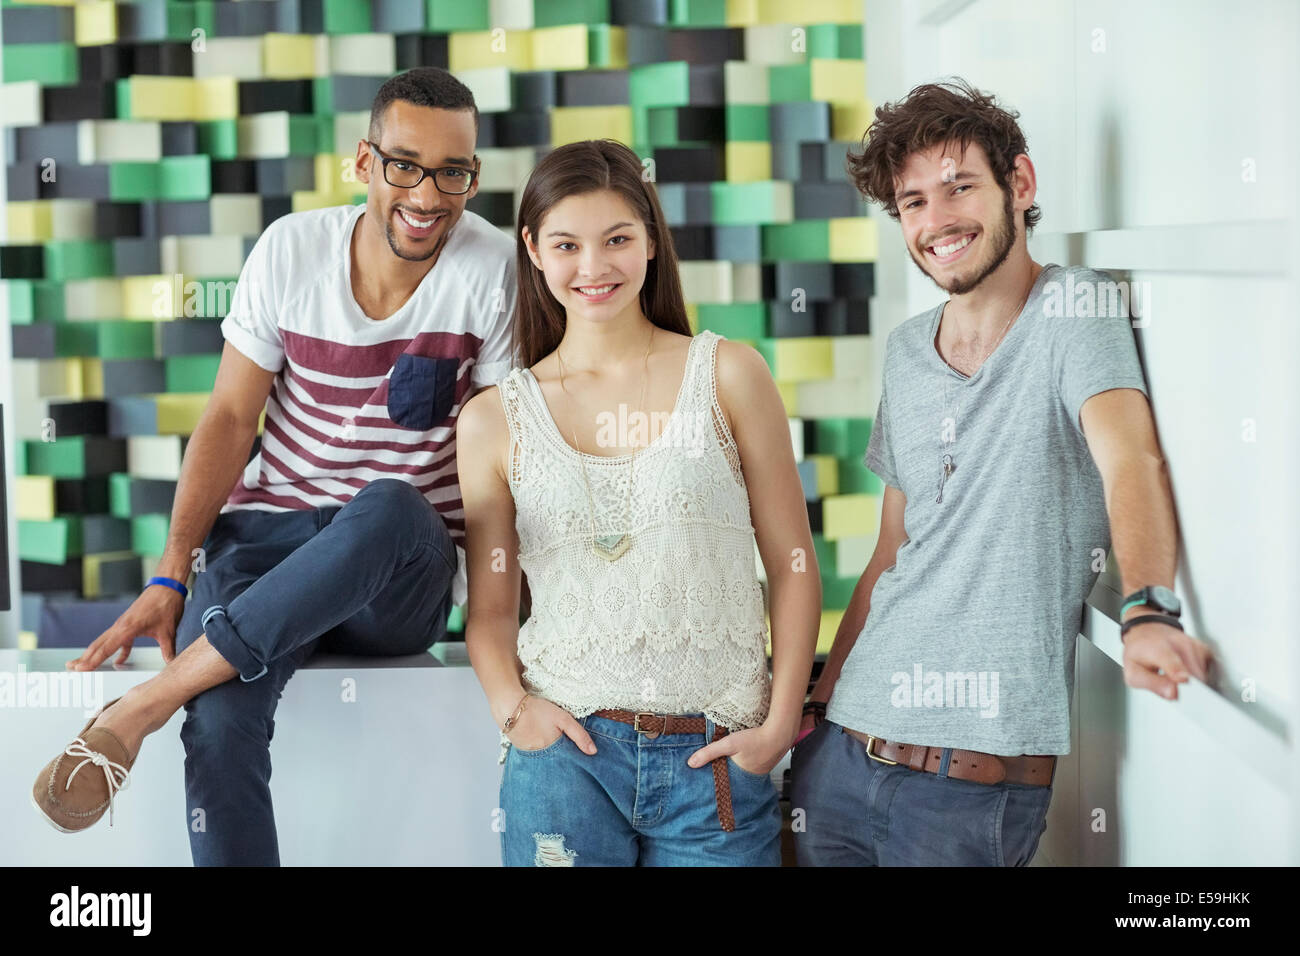 People smiling together in office Stock Photo